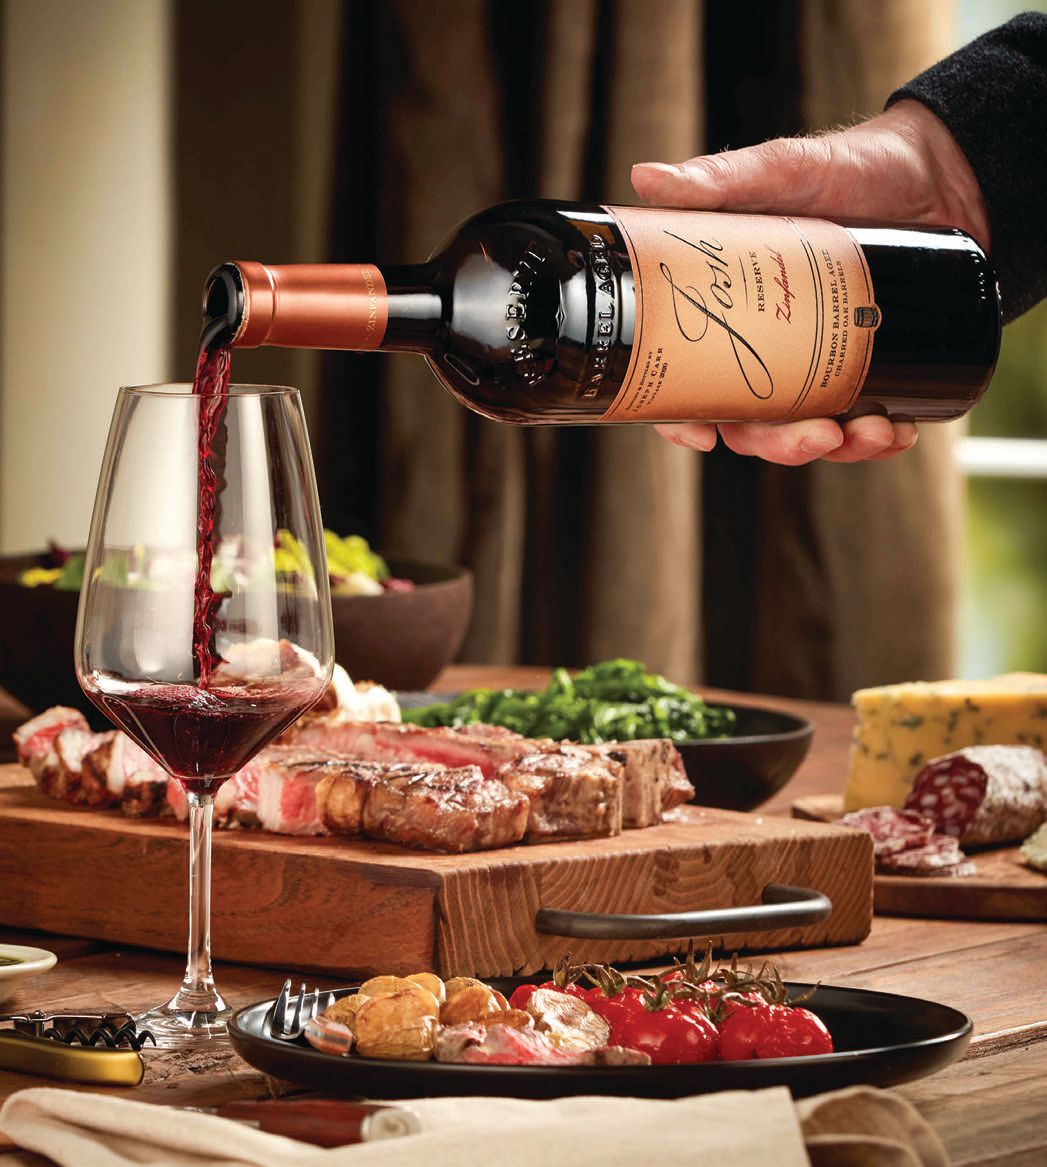 Bourbon barrel-aged zinfandel from Josh Cellars pairs wonderfully with meats, cheese and charcuterie PHOTO: COURTESY OF JOSH CELLEARS